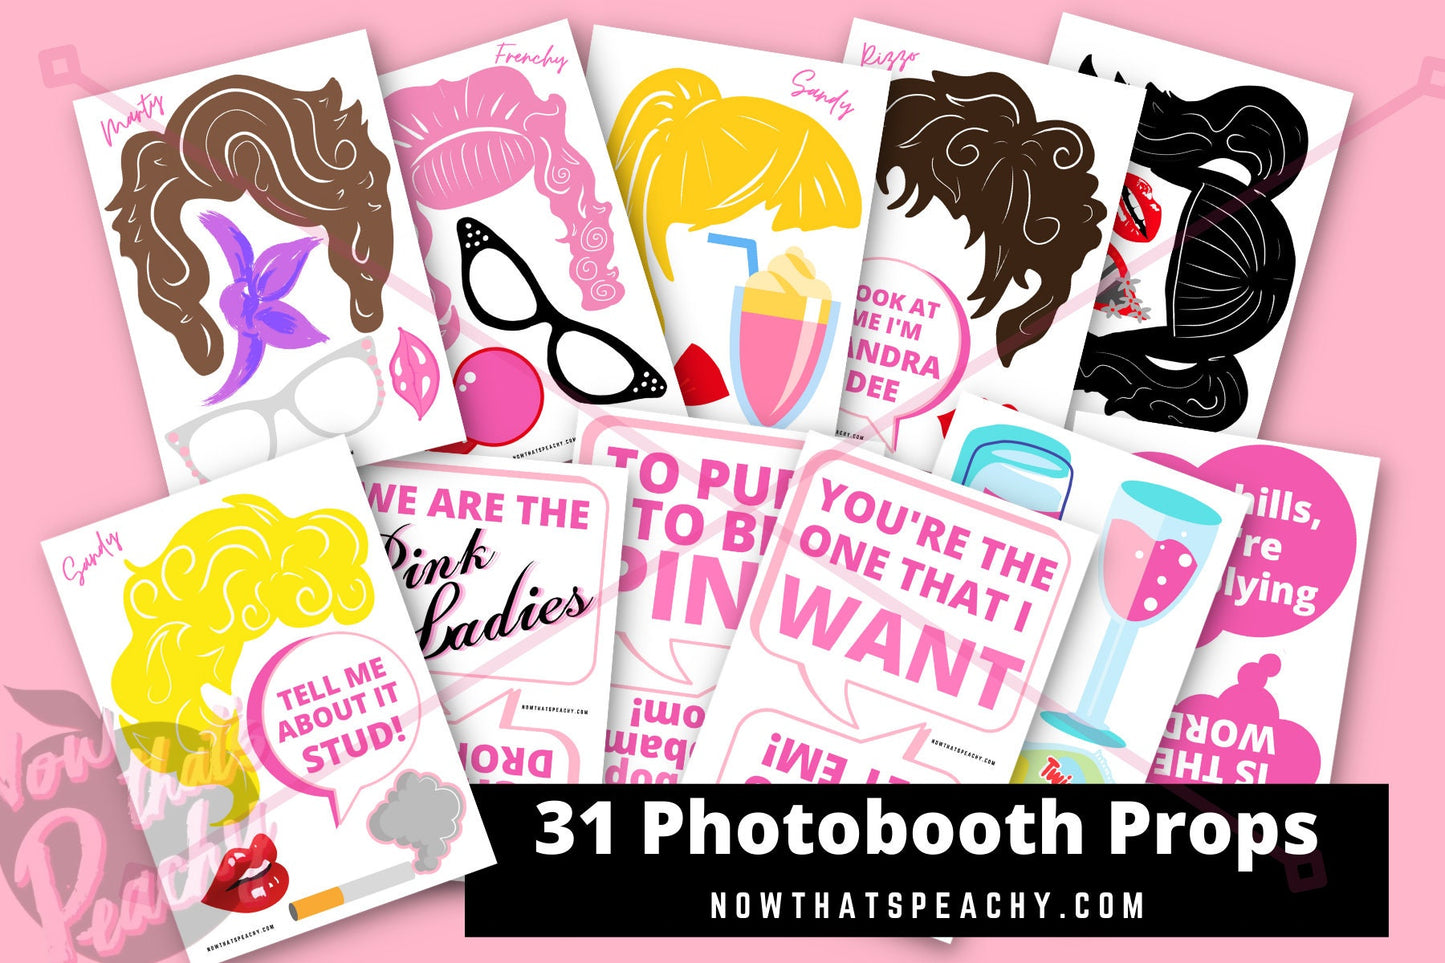 Grease theme Photo booth PRINTABLES Props Pink Ladies themed for Birthdays Bachelorette